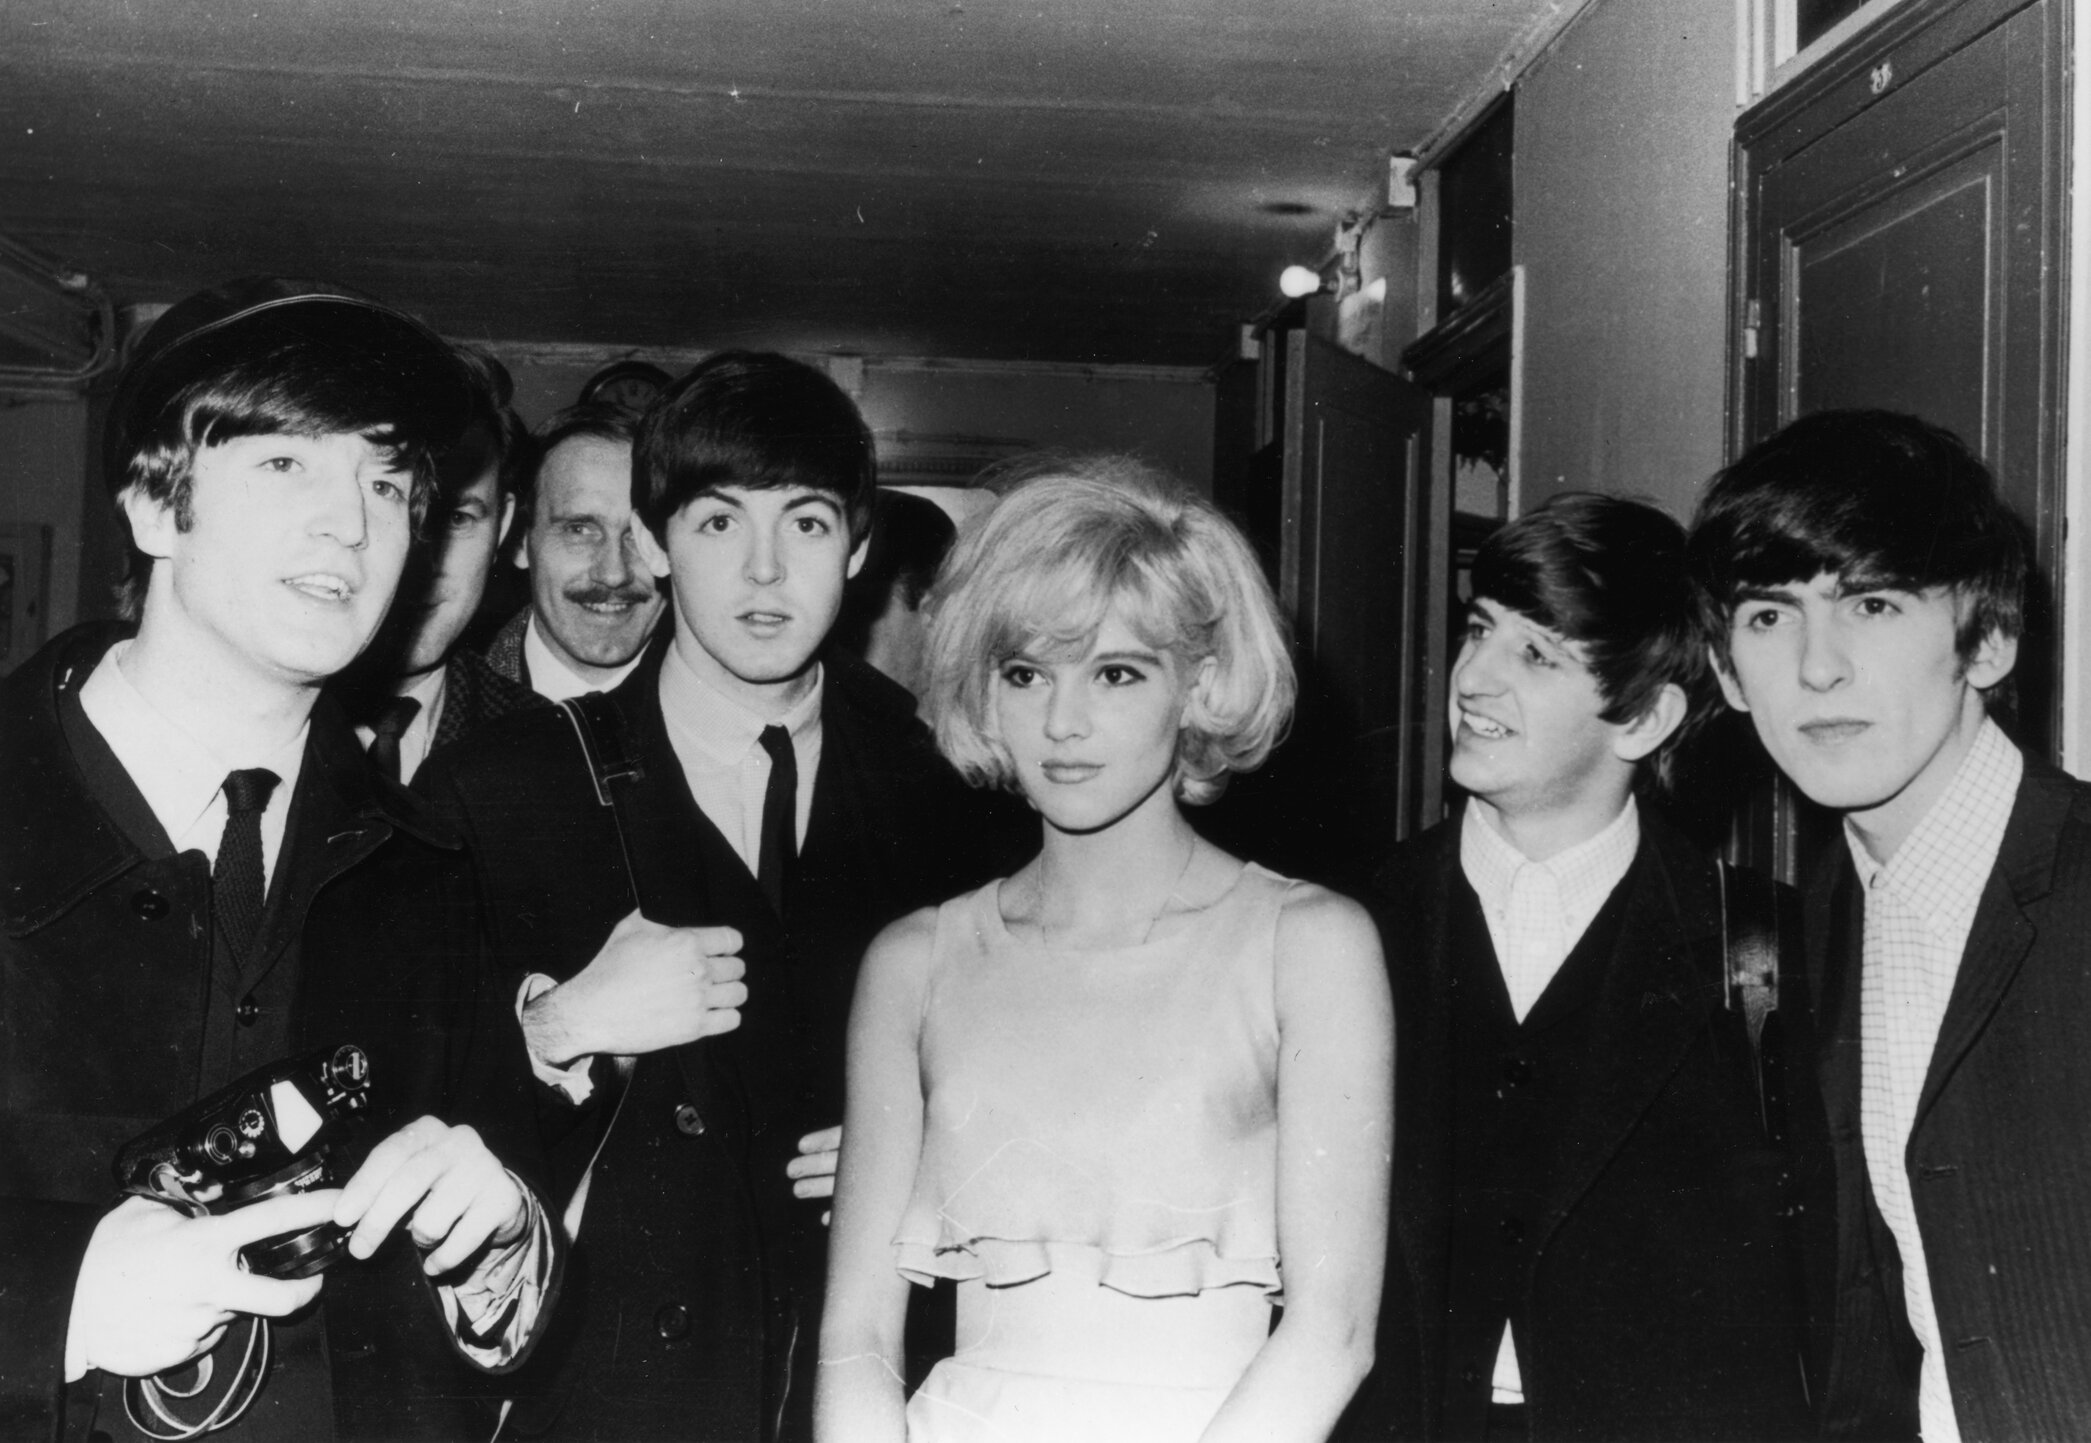 The British pop band The Beatles, left to right, John Lennon, Paul McCartney, Ringo Starr, and George Harrison, after their Paris show in 1964 with their co-star, the French singer Sylvie Vartan.